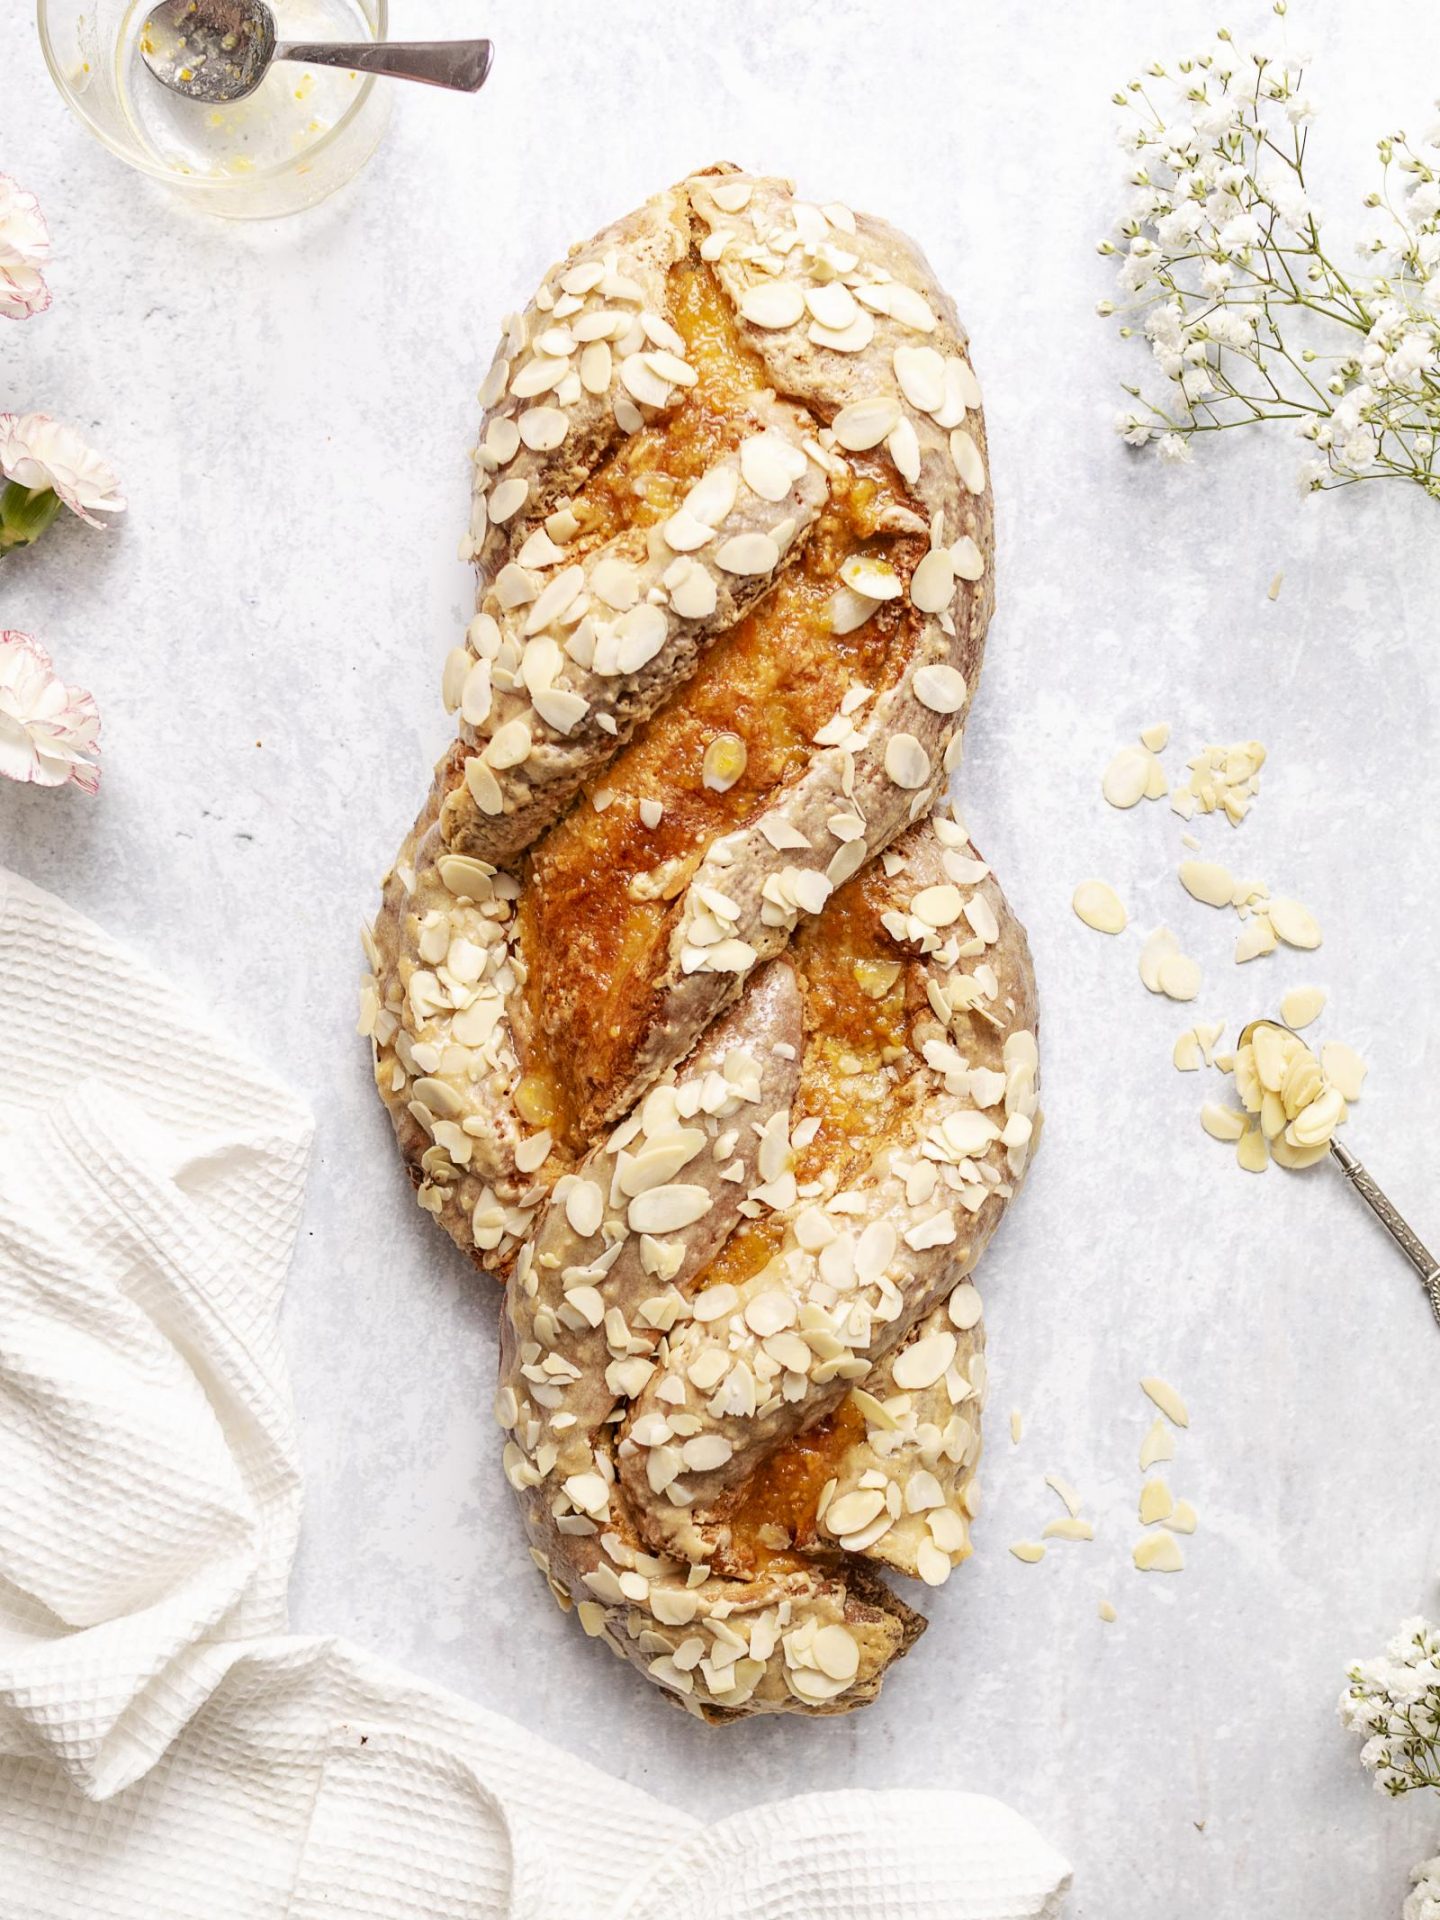 Vegan Easter Plait with marzipan and almonds on a white marble backdrop